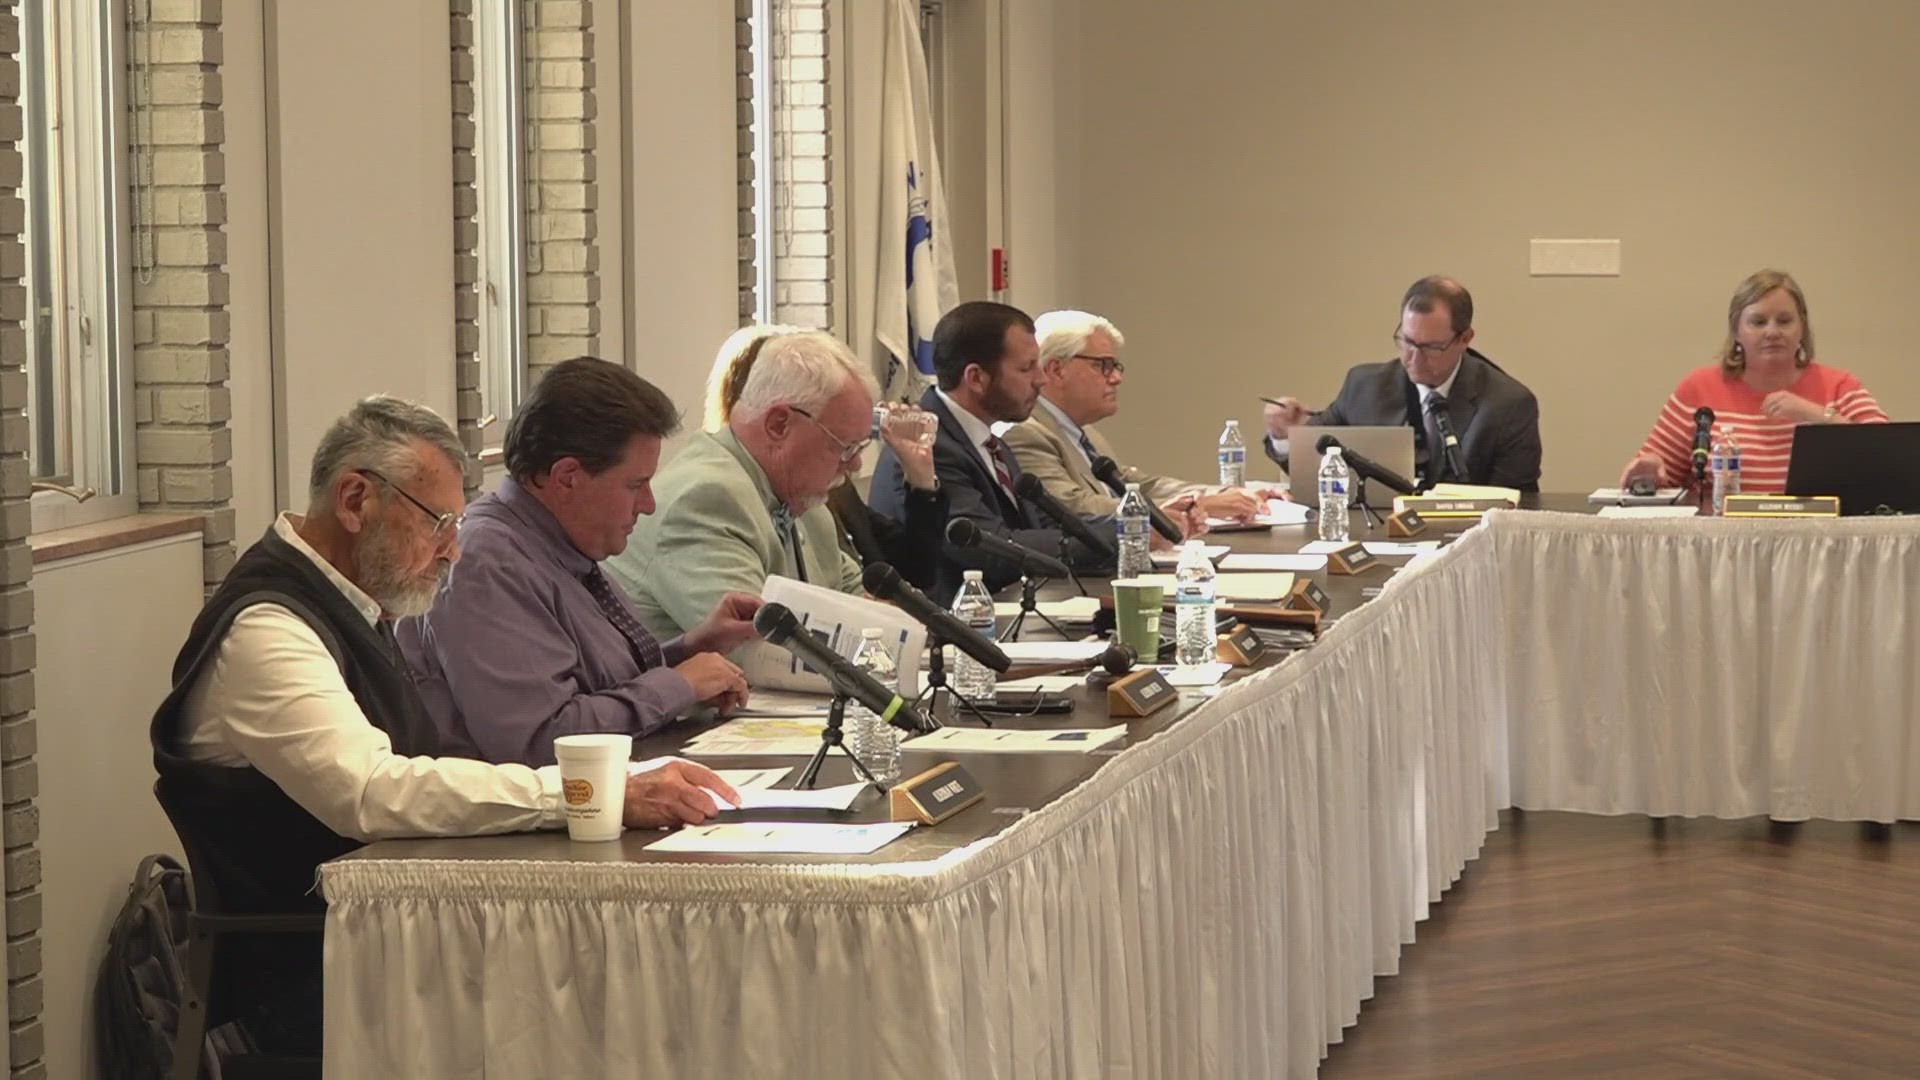 The Farragut Board of Mayor and Aldermen voted against a Knox County growth plan already approved by Knox County and Knoxville.